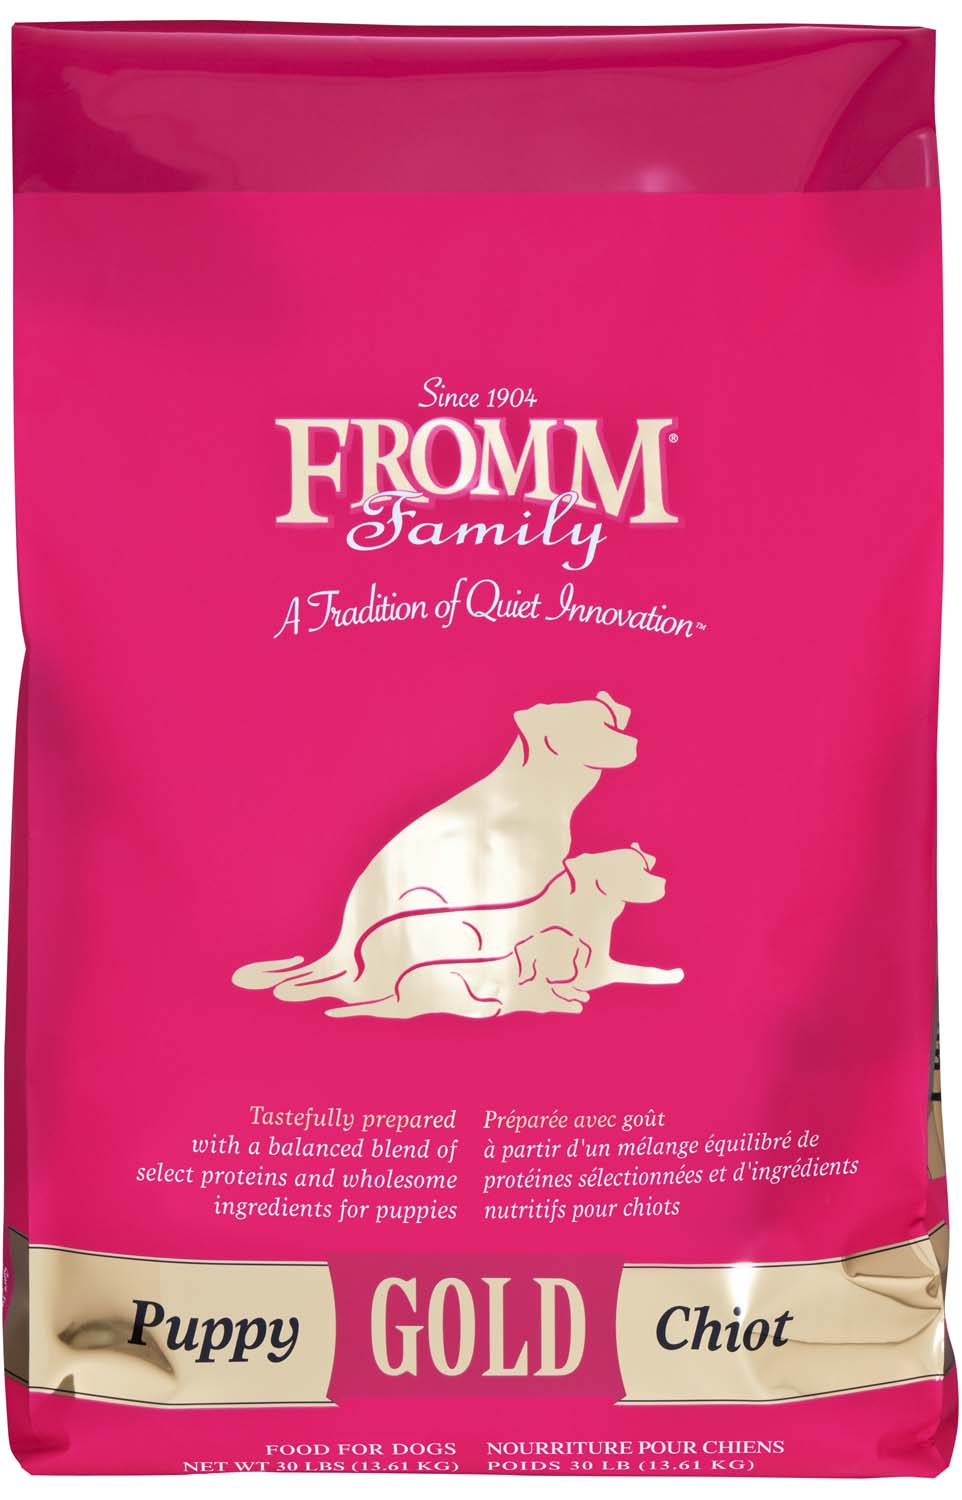 Fromm Family Puppy Gold Food for Dogs, 30 lbs